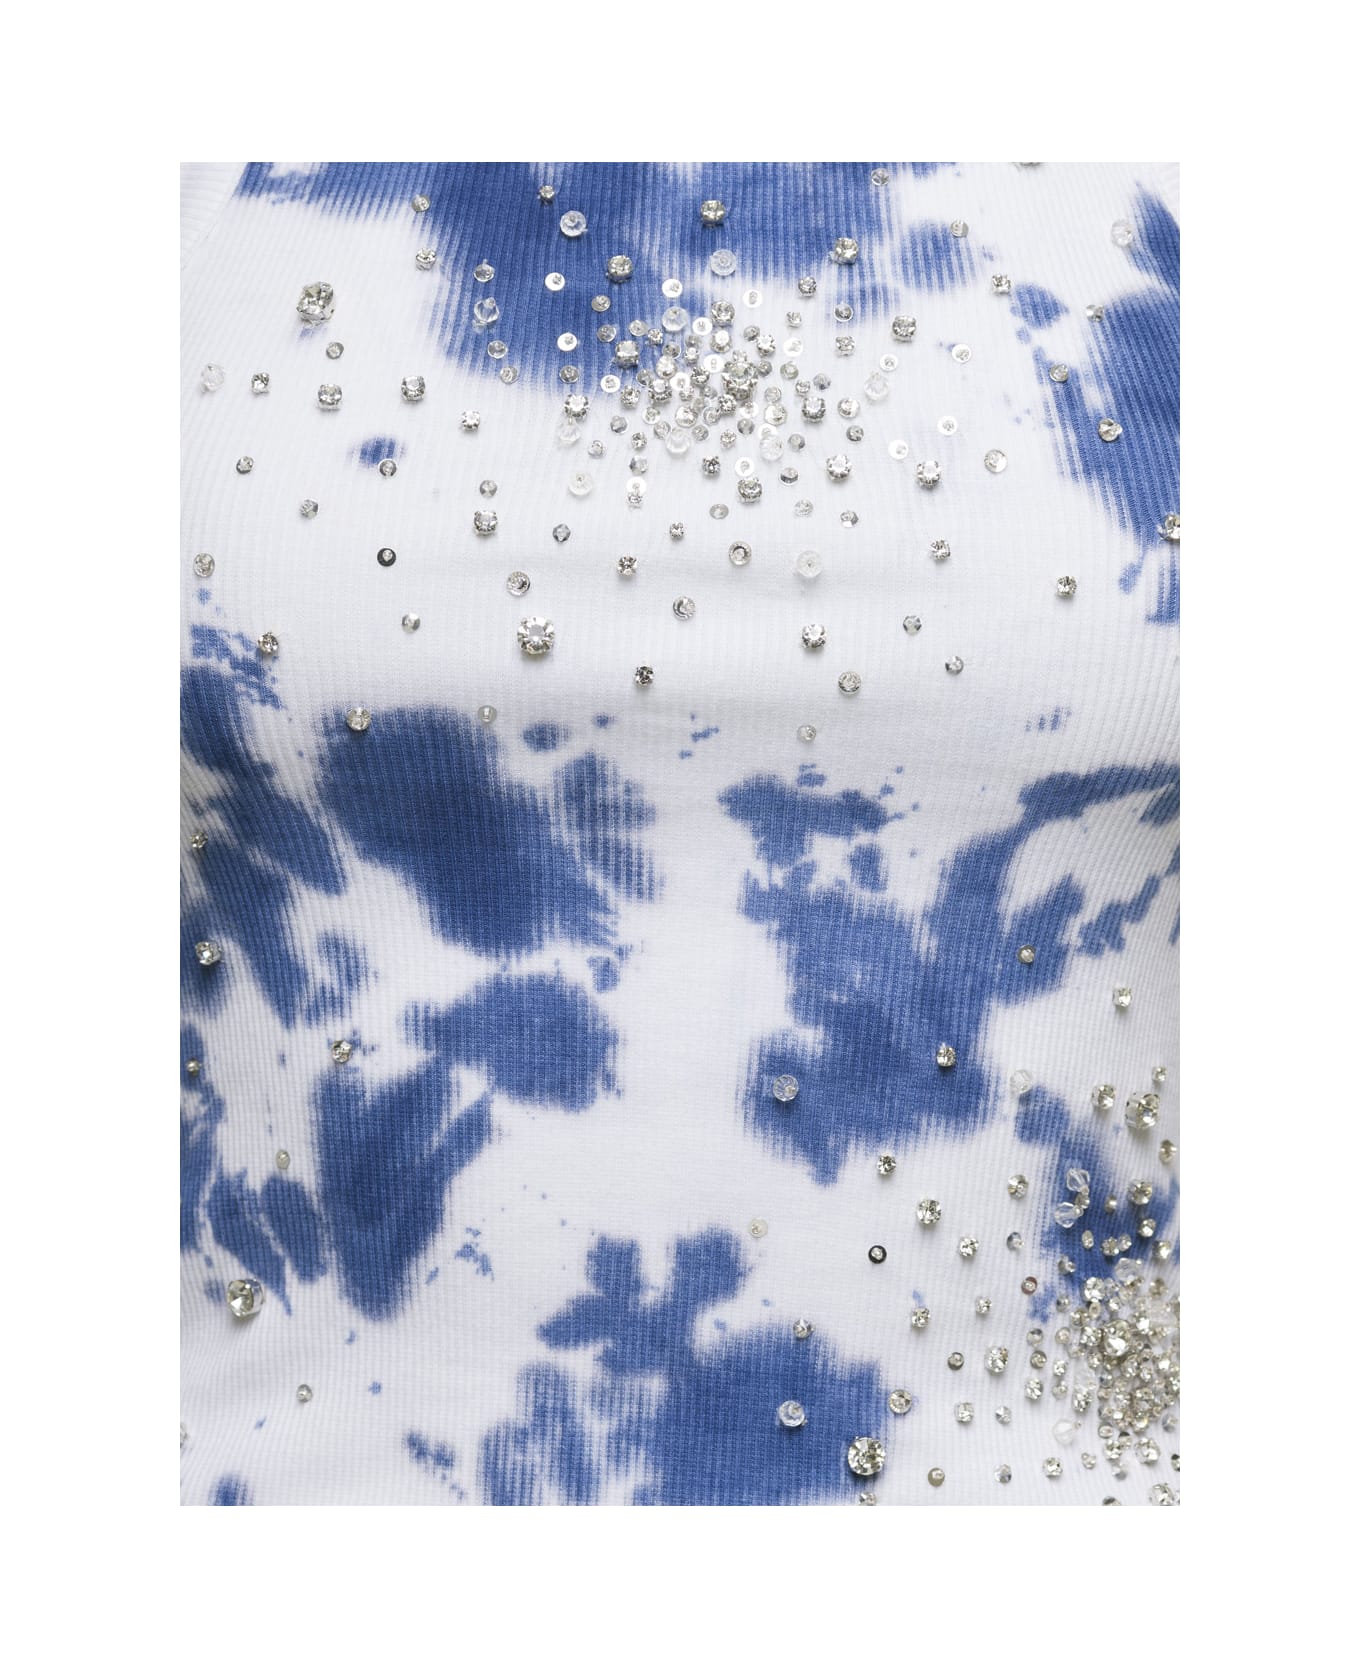 Des Phemmes White Tank Top With Sequins And Tie Die In Cotton Woman - Blu タンクトップ